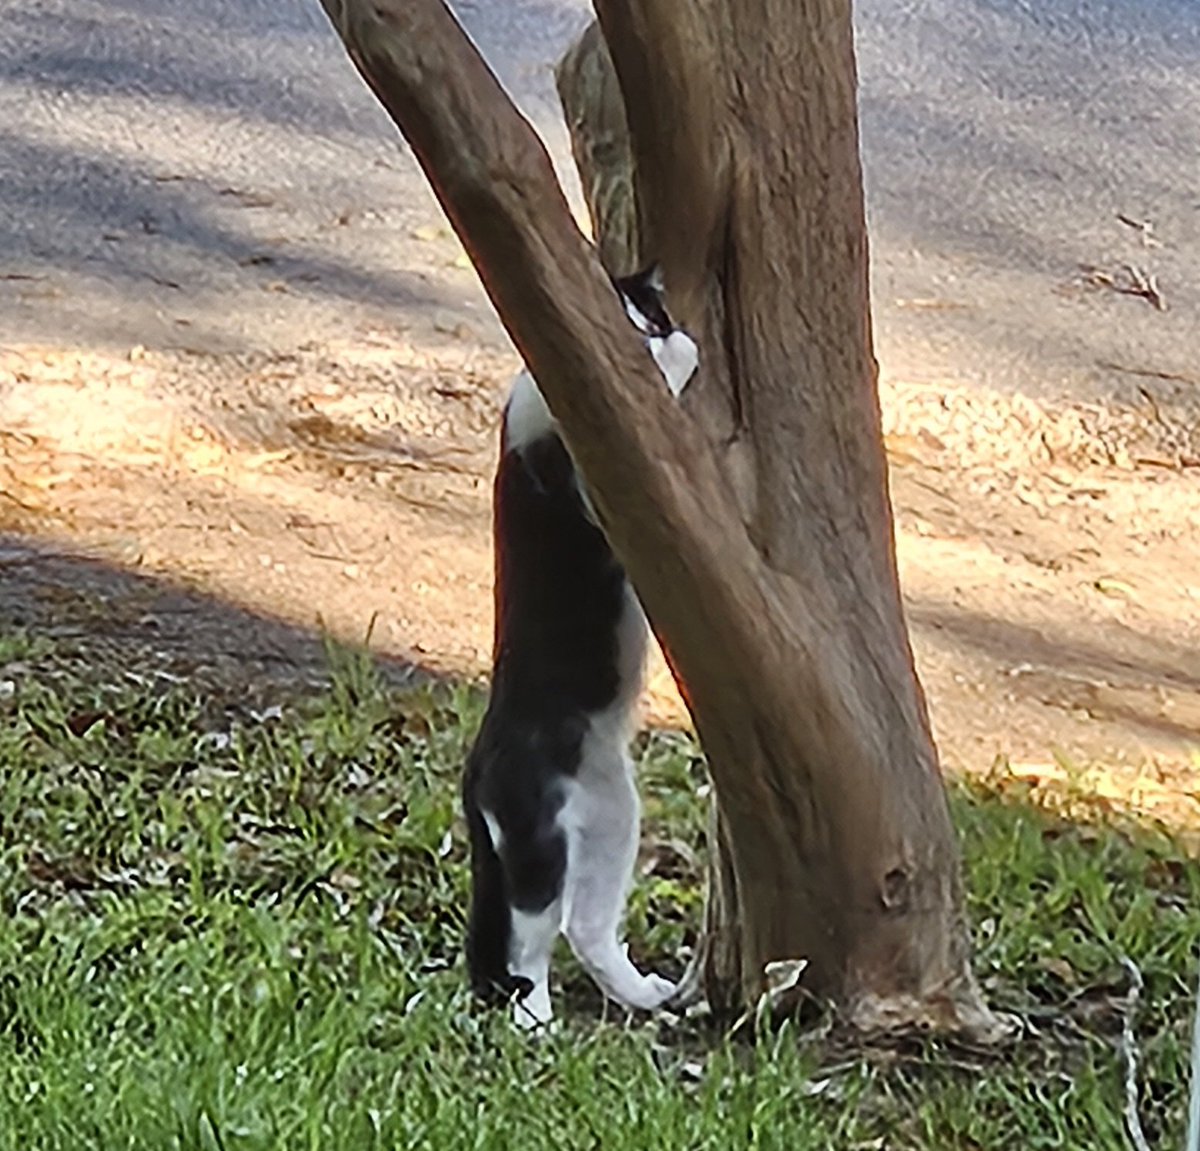 Good morning & Happy Saturday! Our new little baby feral kitty, Tuxie, showed up for breakfast & chased a squirrel up the tree. So cute. 🐈‍⬛